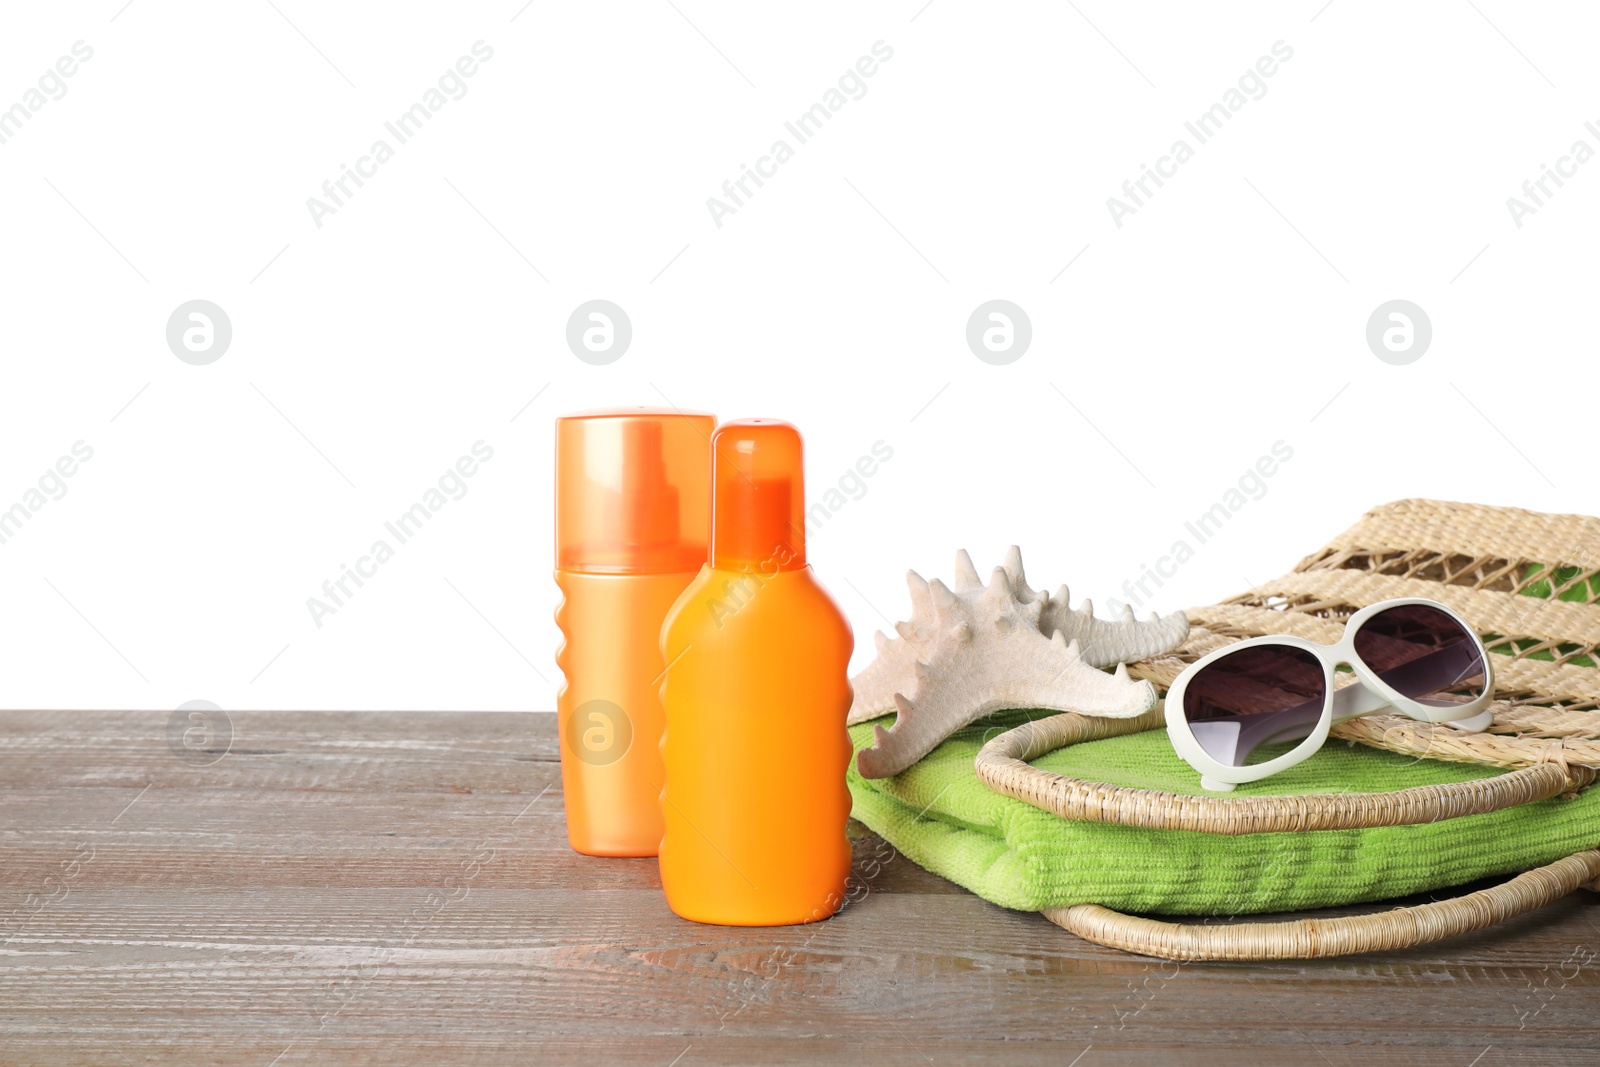 Photo of Sun protection products and beach accessories on wooden table against white background